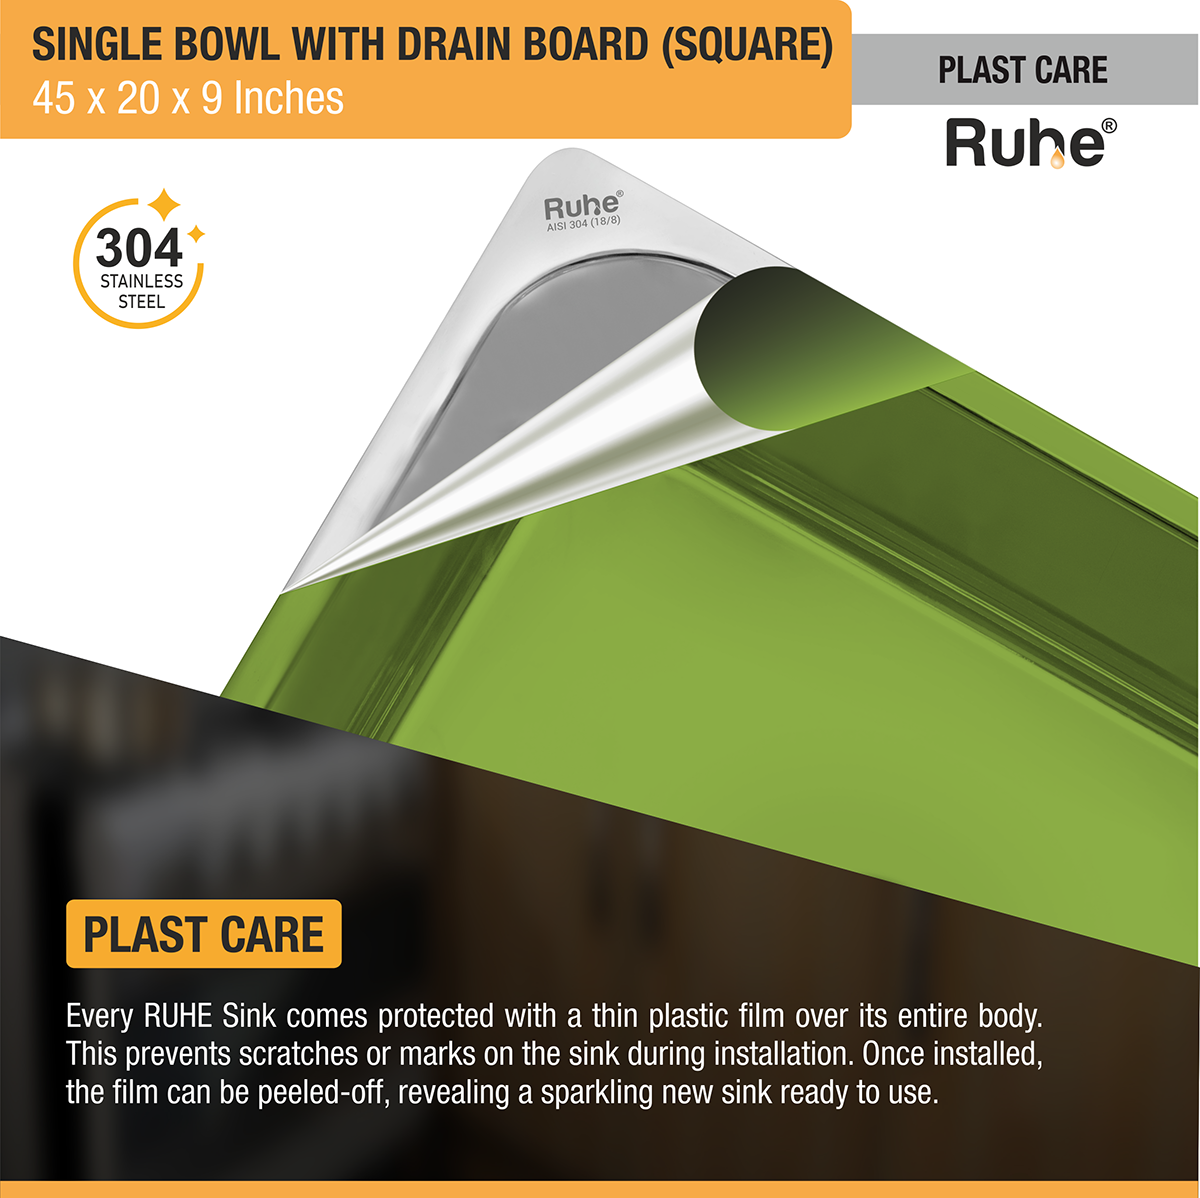 Square Single Bowl (45 x 20 x 9 Inches) 304-Grade Stainless Steel Kitchen Sink with Drainboard plast care